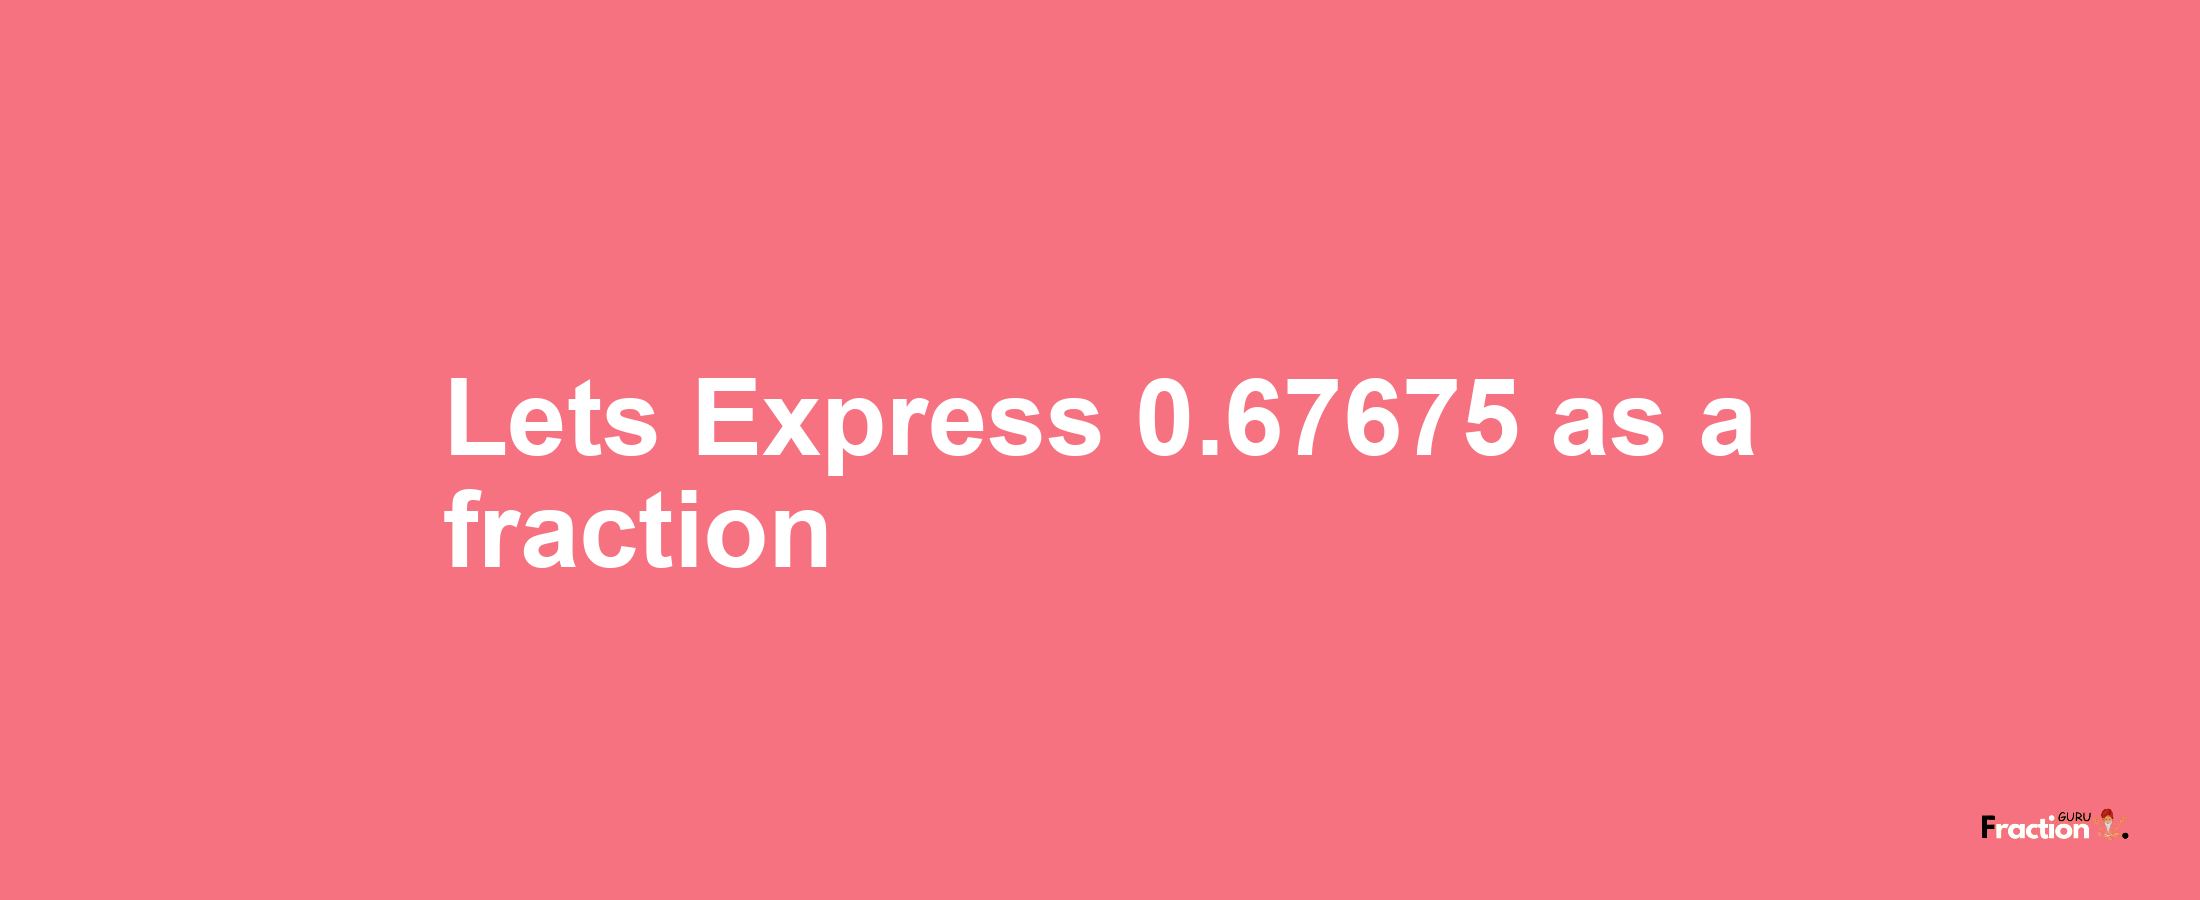 Lets Express 0.67675 as afraction